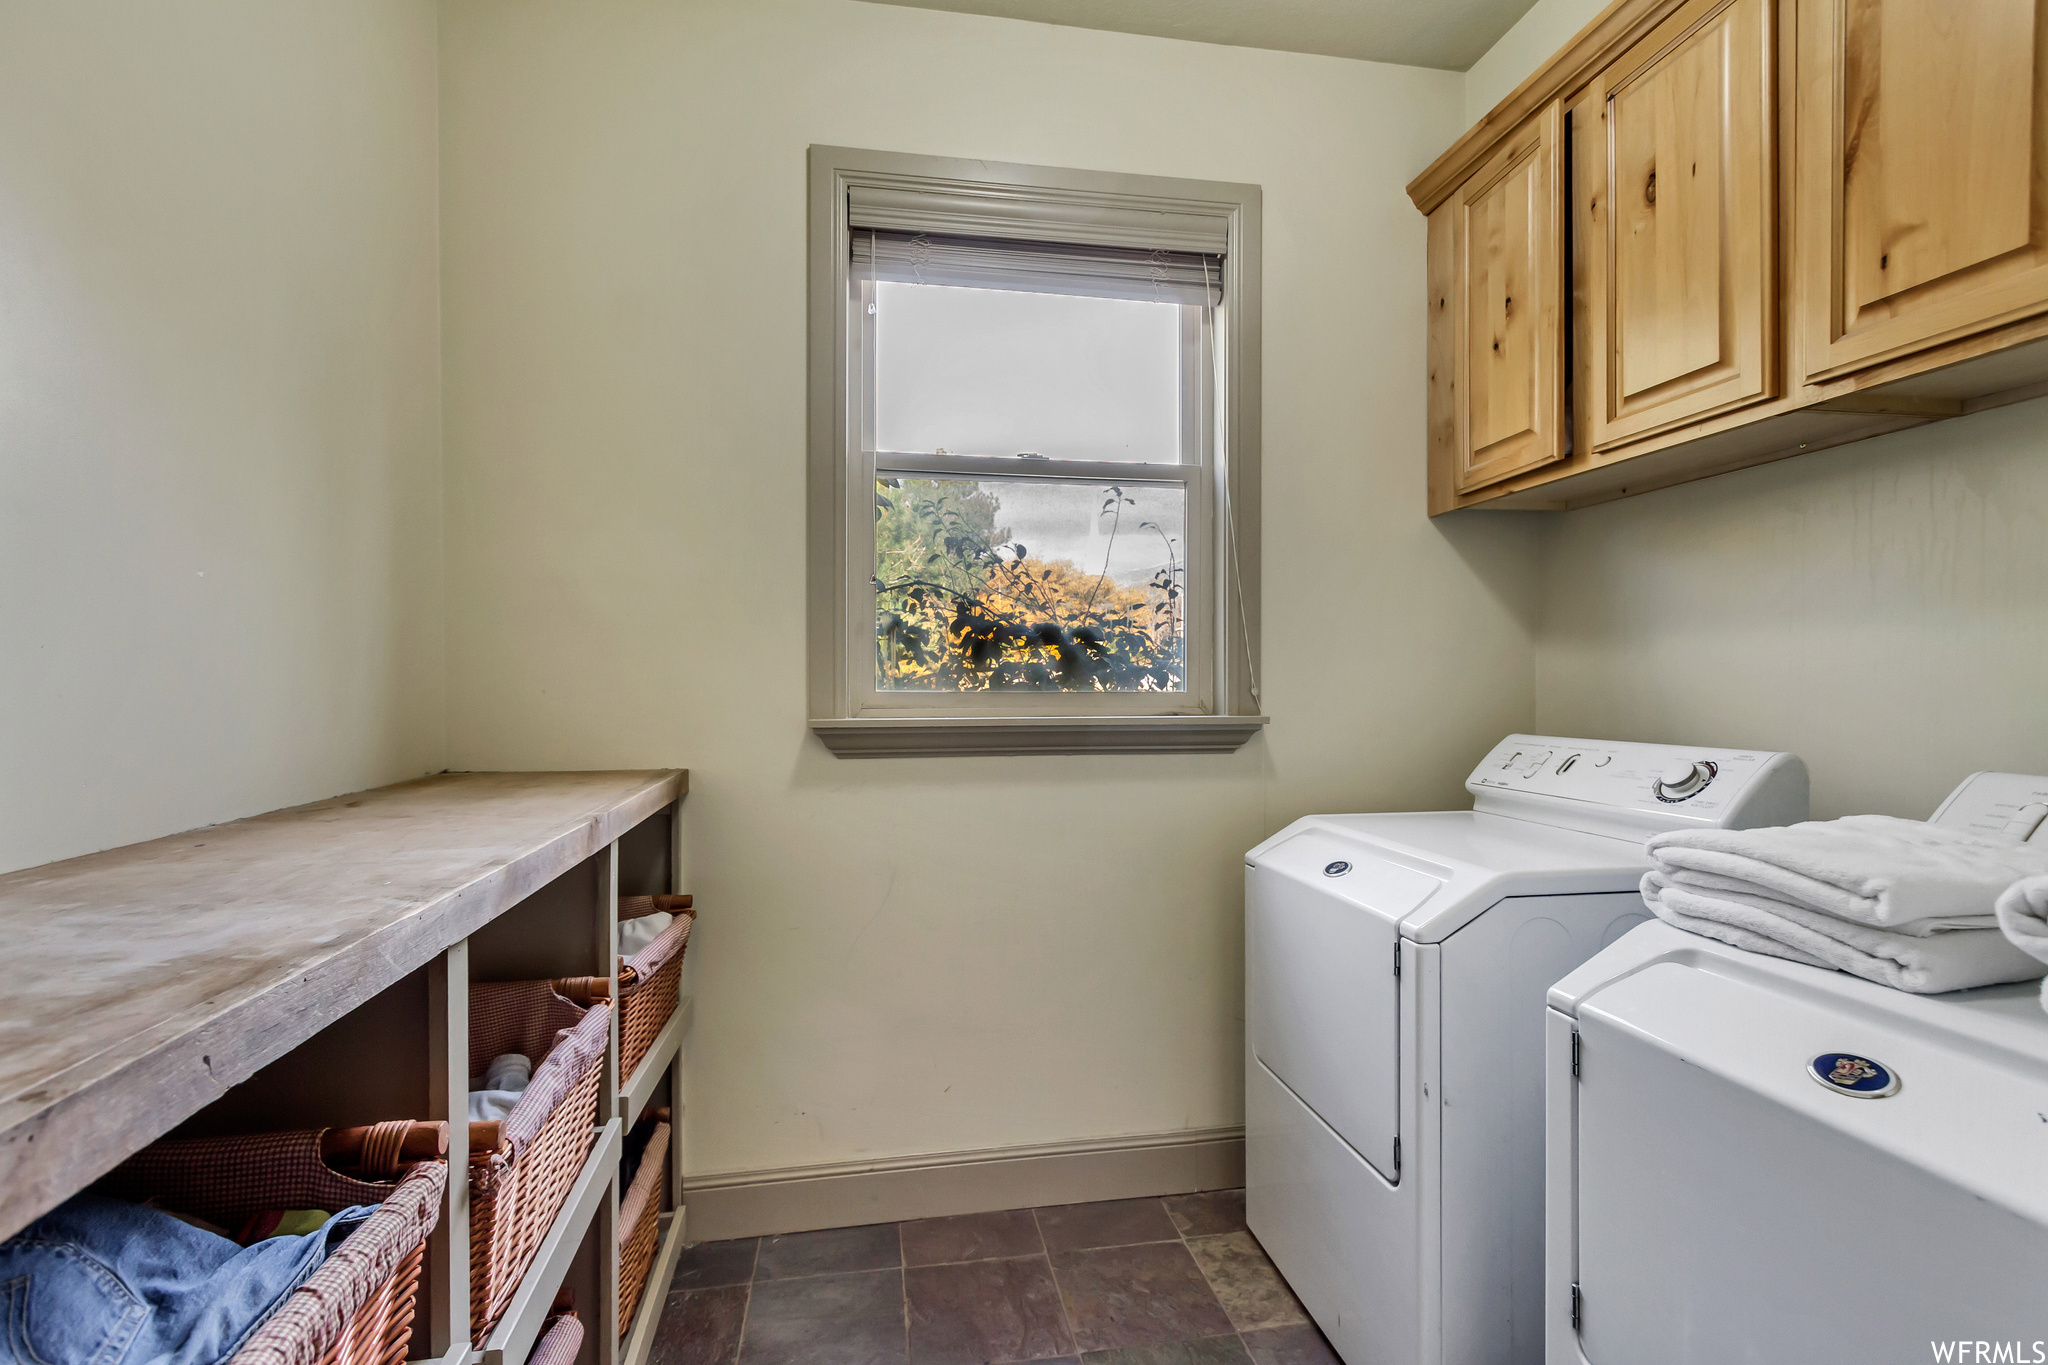 Laundry area featuring dark tile floors, washing machine and dryer, and cabinets